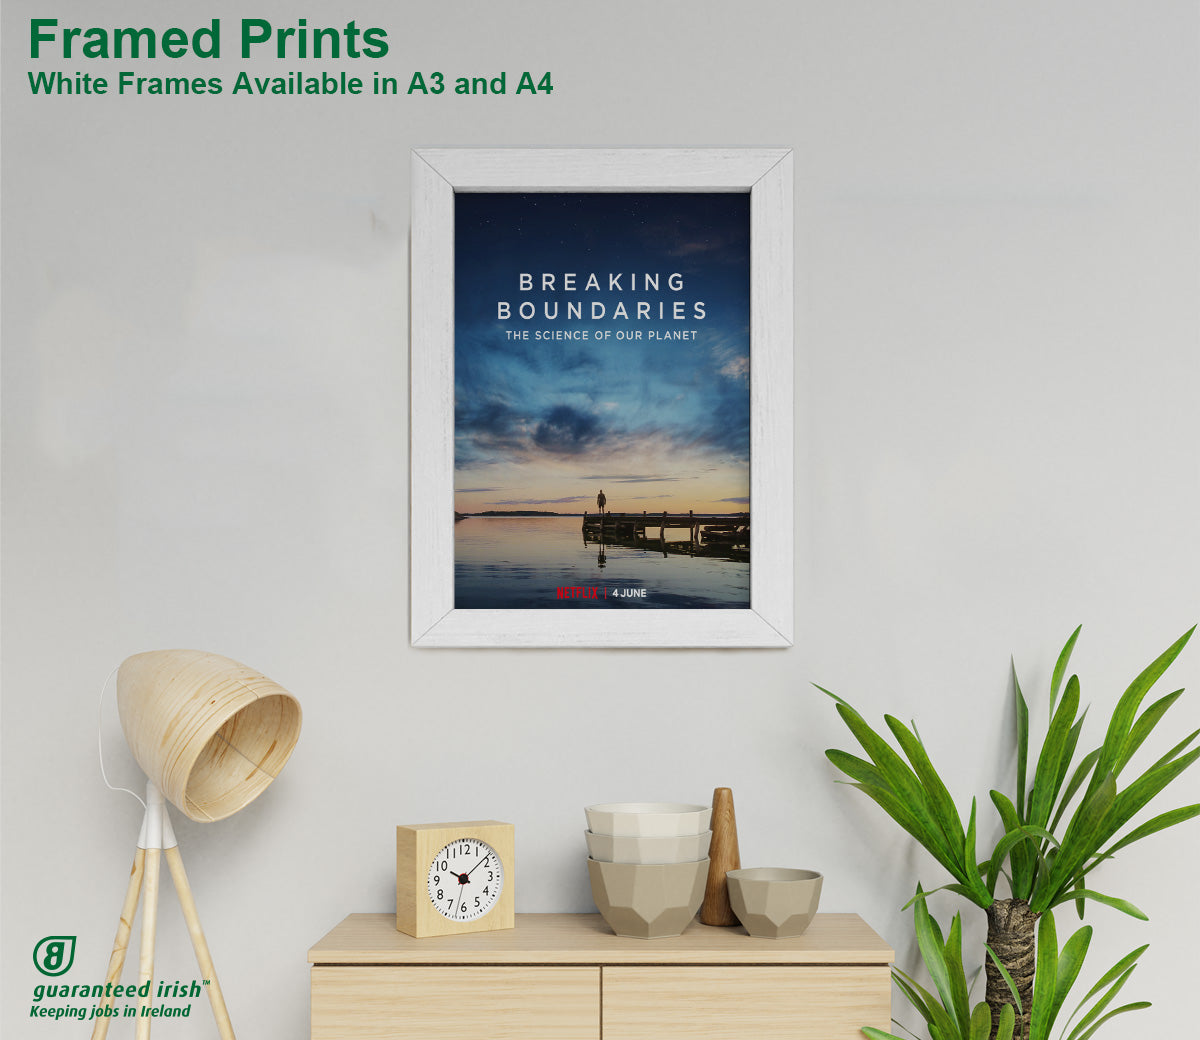 Framed Prints - White Frames Available in A4 and A3